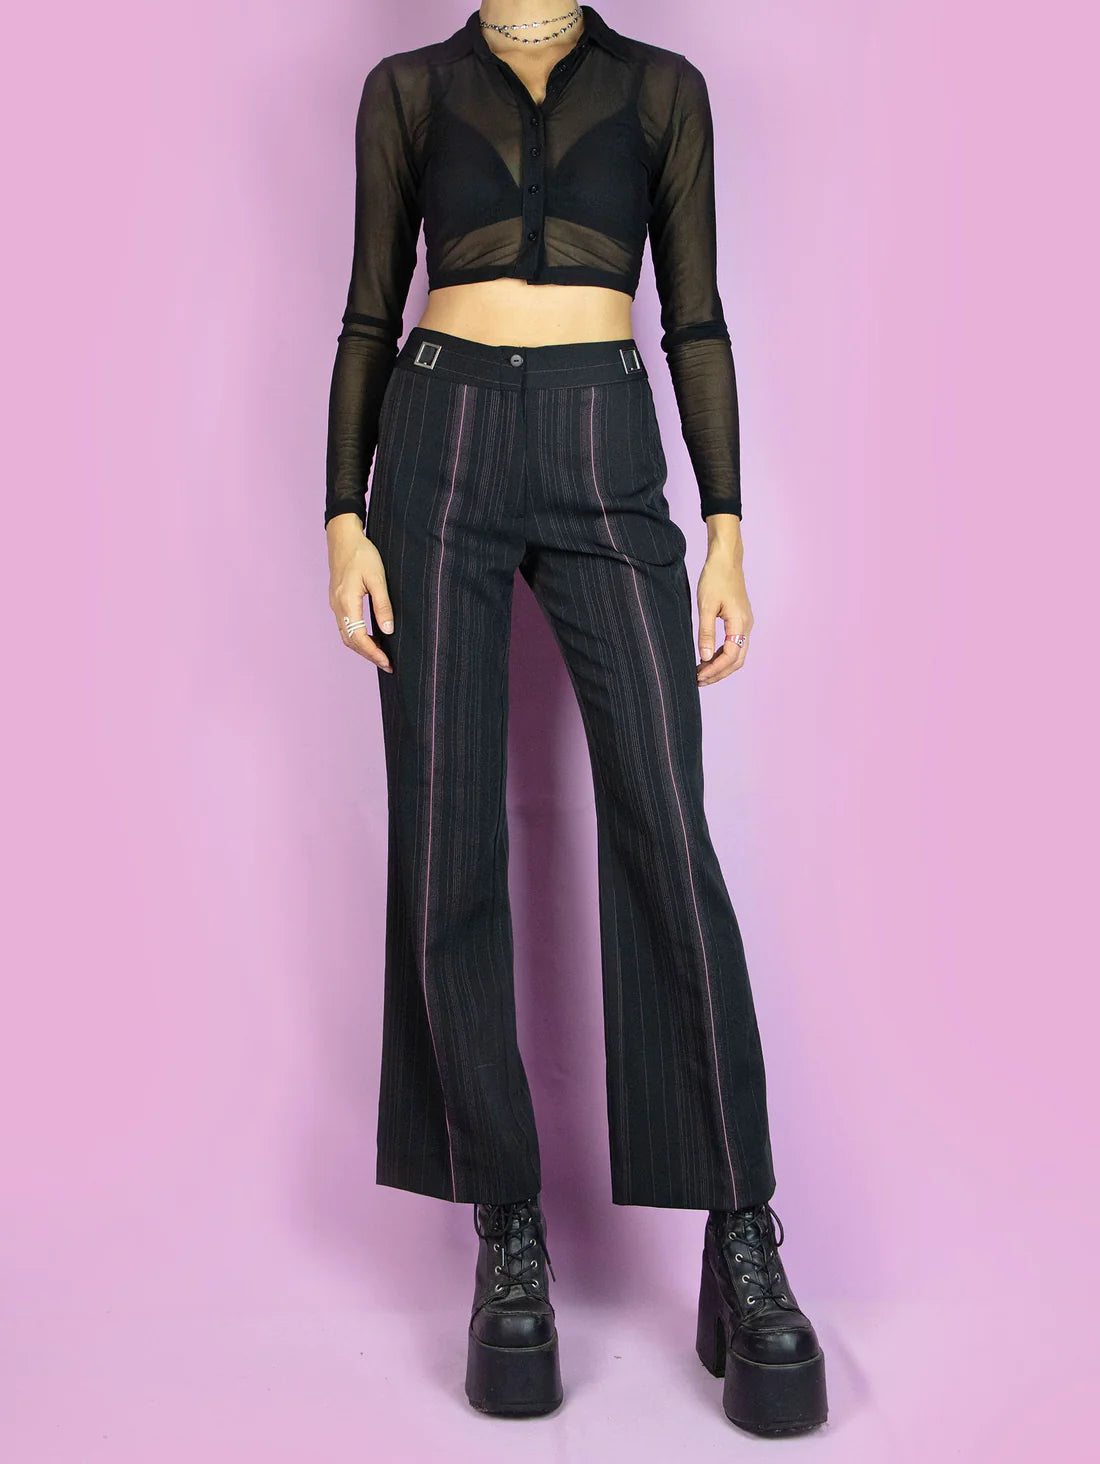 Explore our carefully curated collection of vintage trousers, featuring festival-ready tie-dye jeans, 70s bell bottoms, contemporary wide-leg cargo pants, extreme 2000s low-rise jeans, and more. Dive into the Adult World Shop for trending styles and timeless staples in 90s and Y2K vintage clothing.